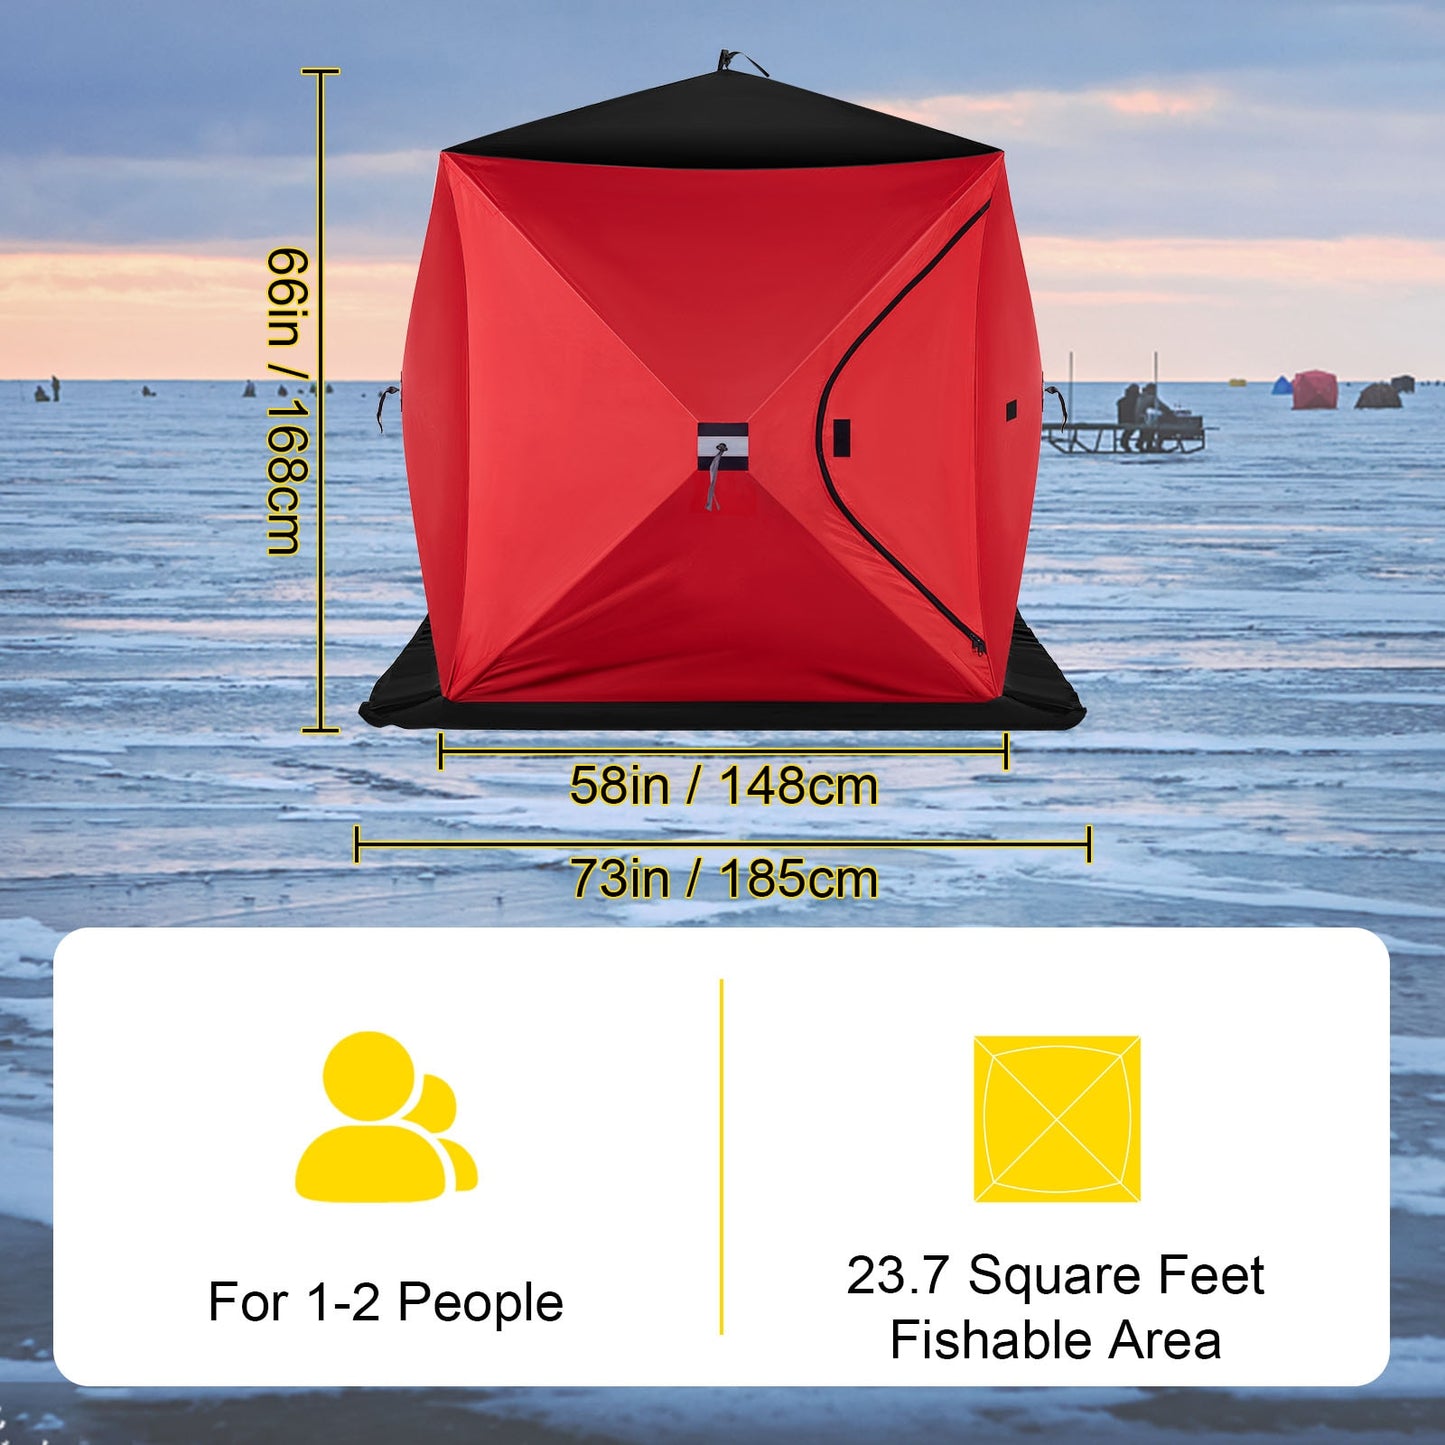 2-Person Oxford Fabric Waterproof Fishing Tent